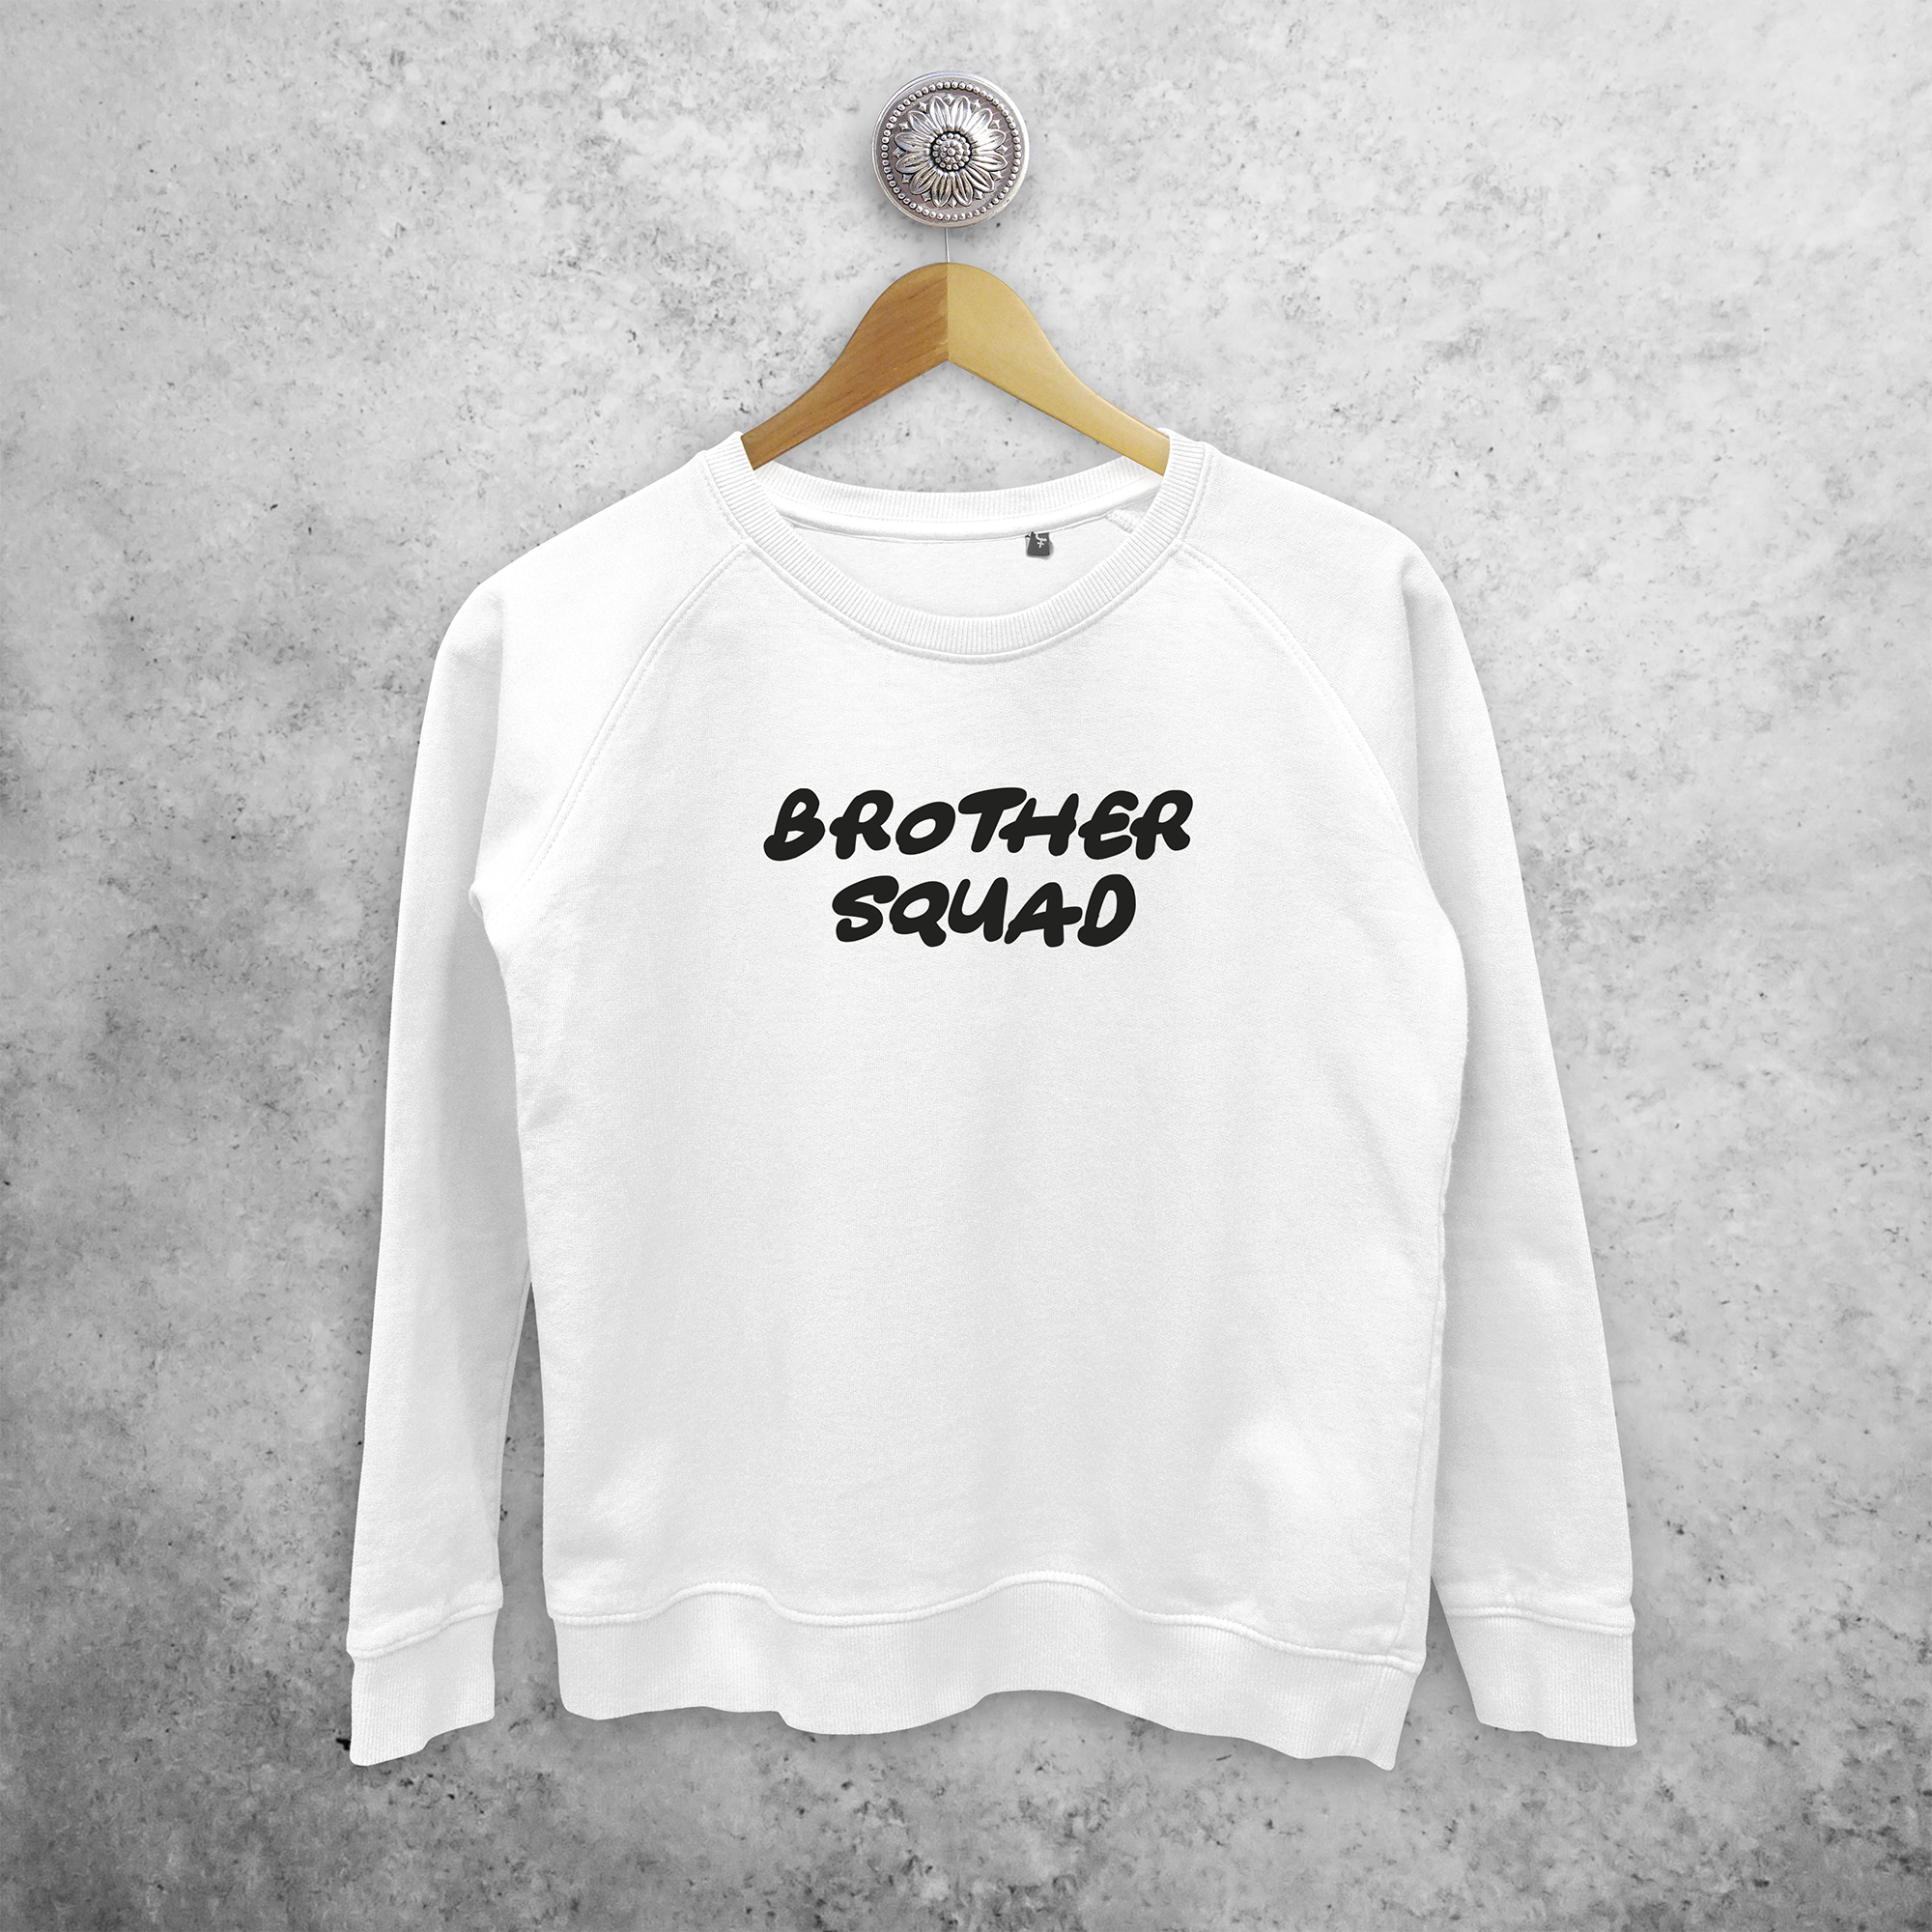 'Brother squad' sweater